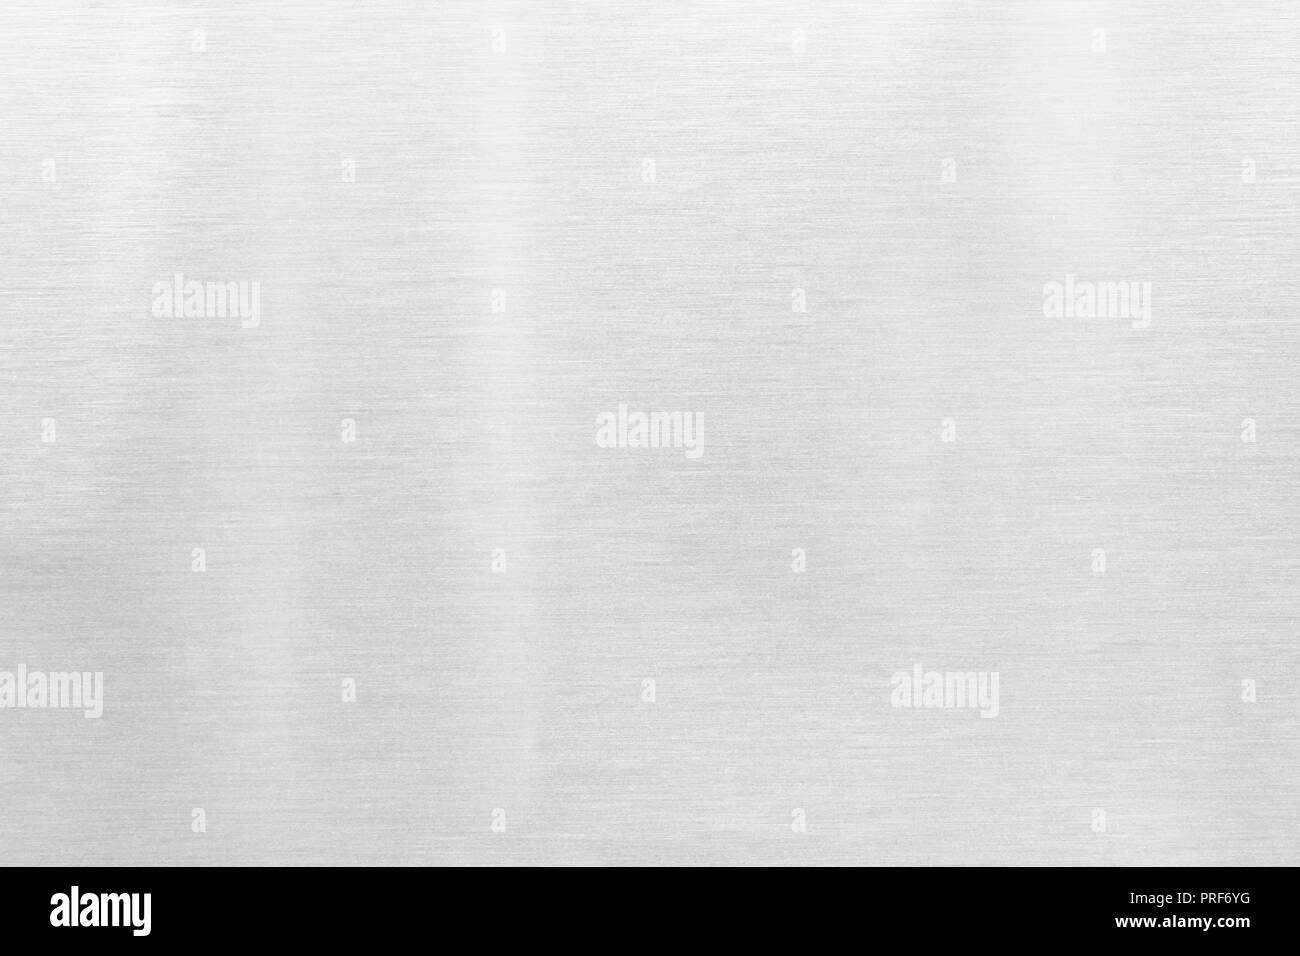 Shiny silver leaf foil abstract texture background Stock Photo - Alamy